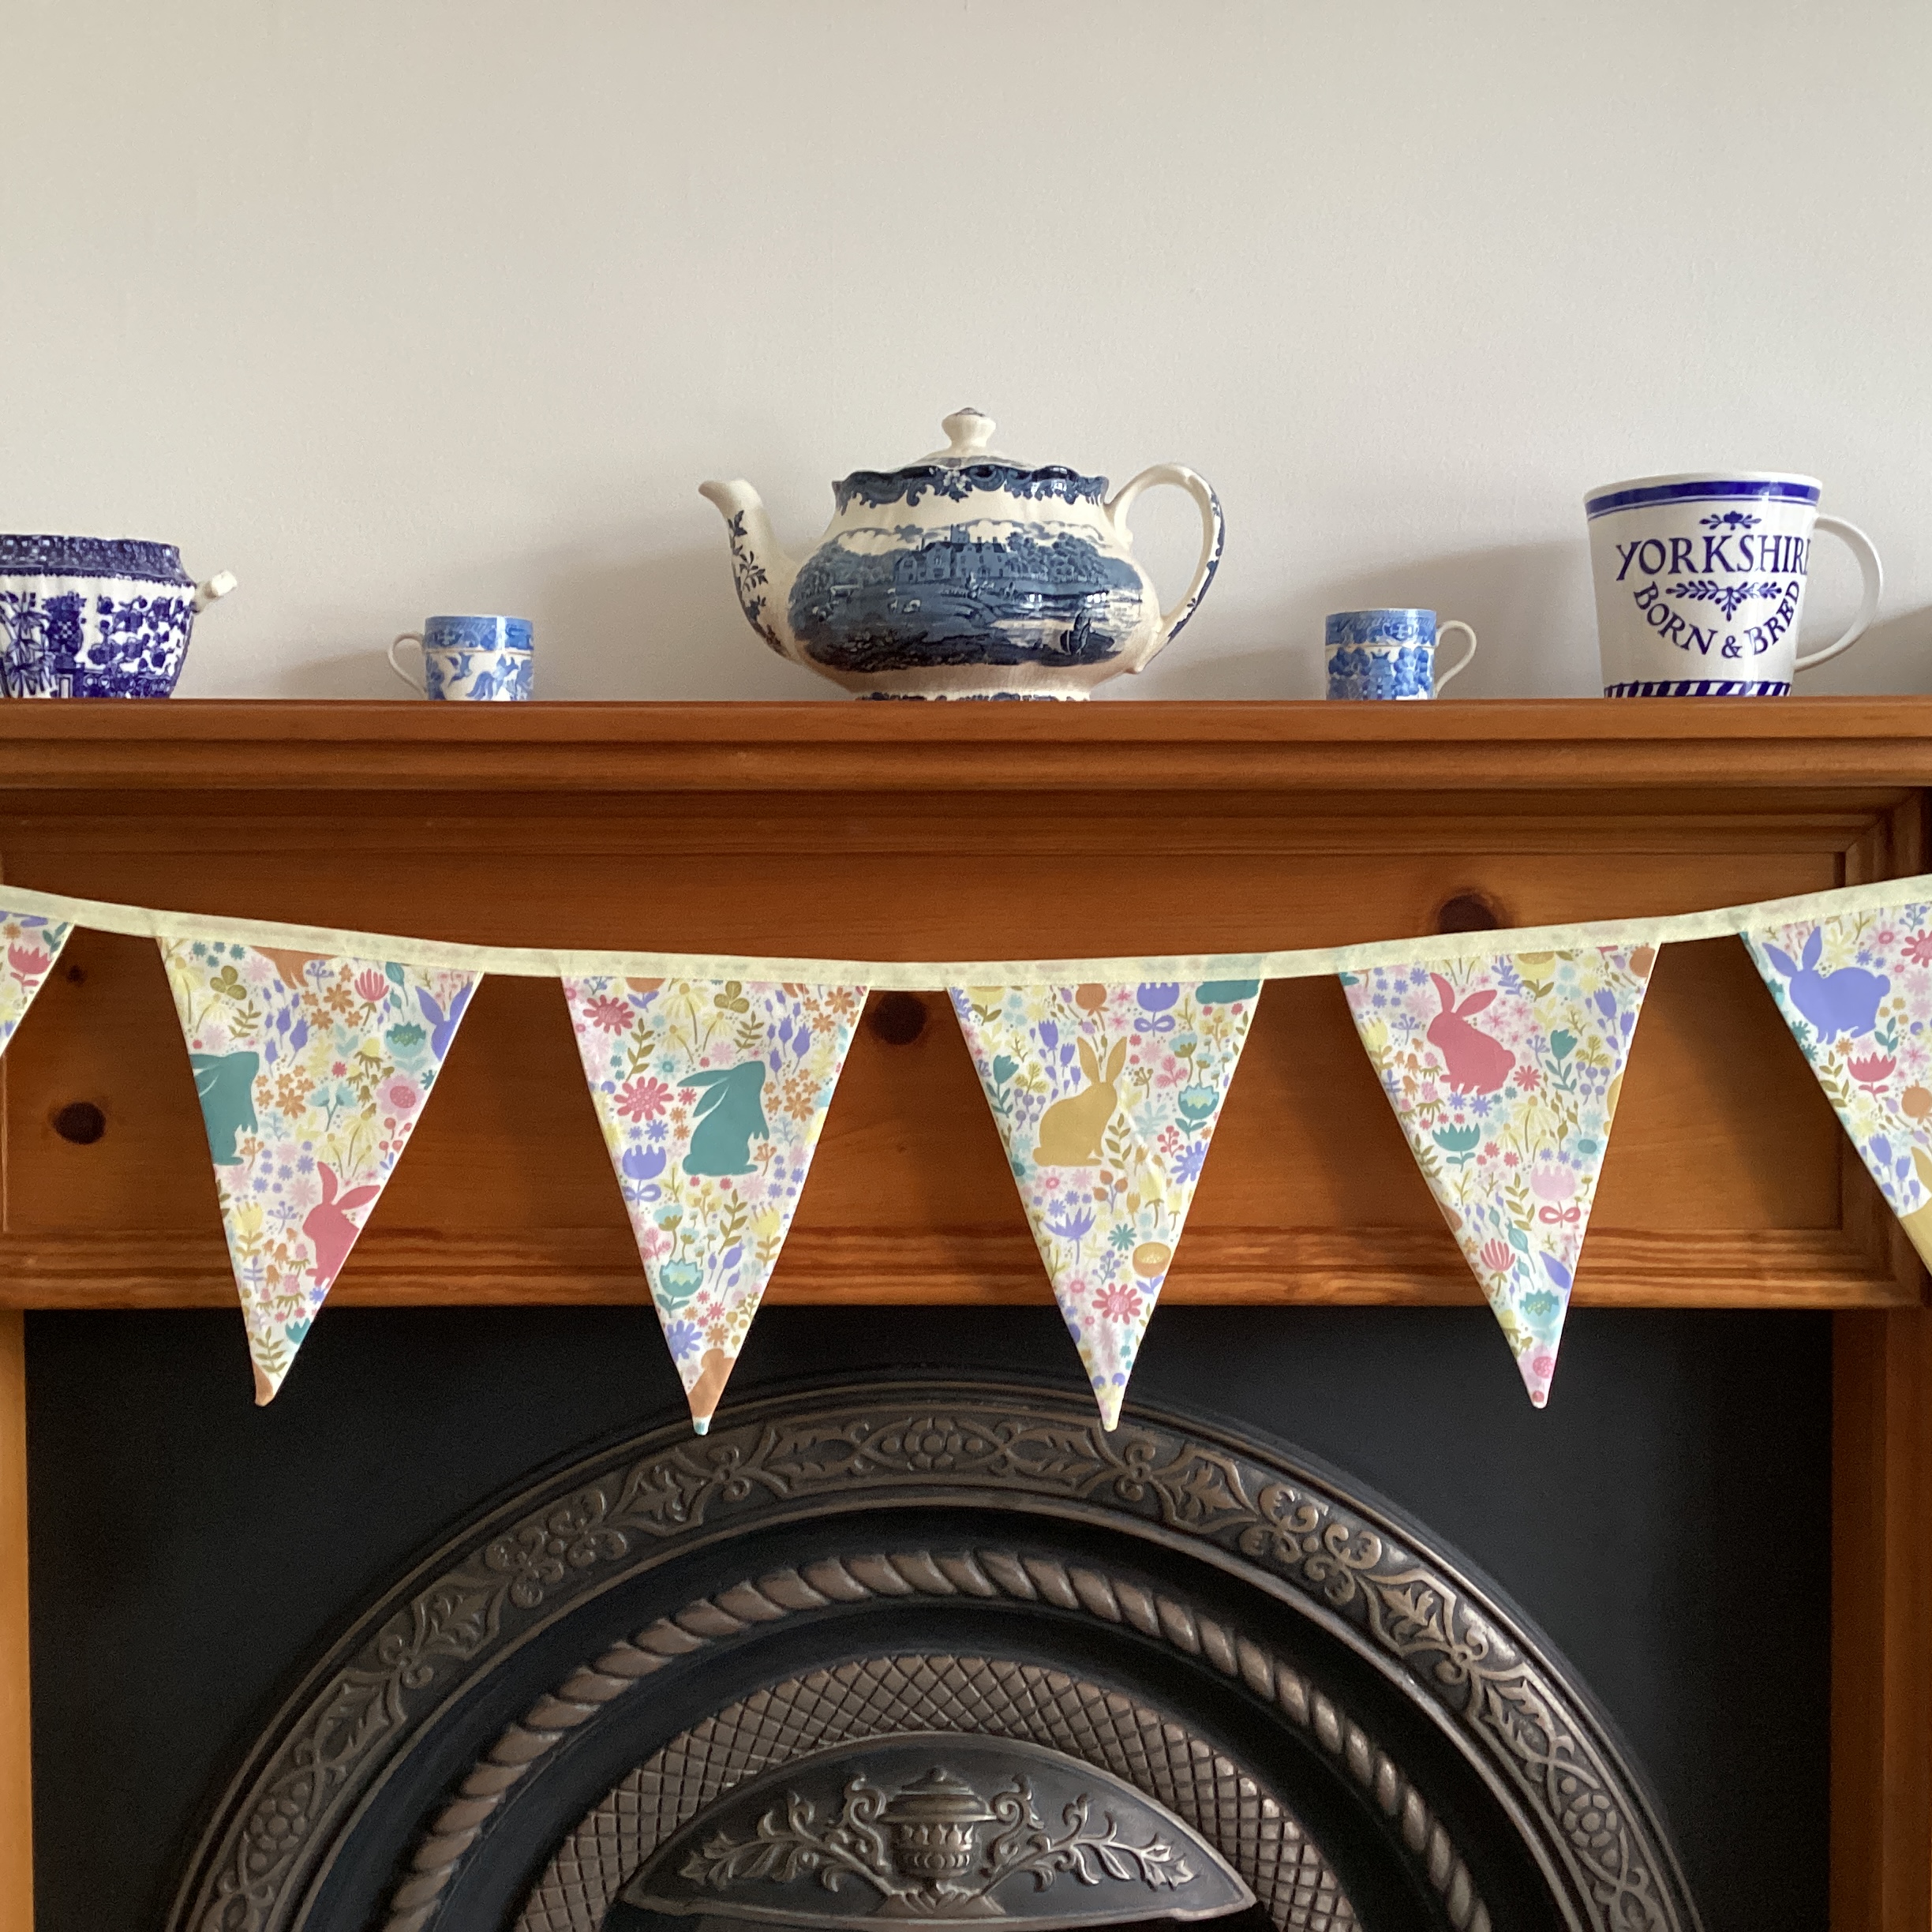 Bunting - Easter silhouettes